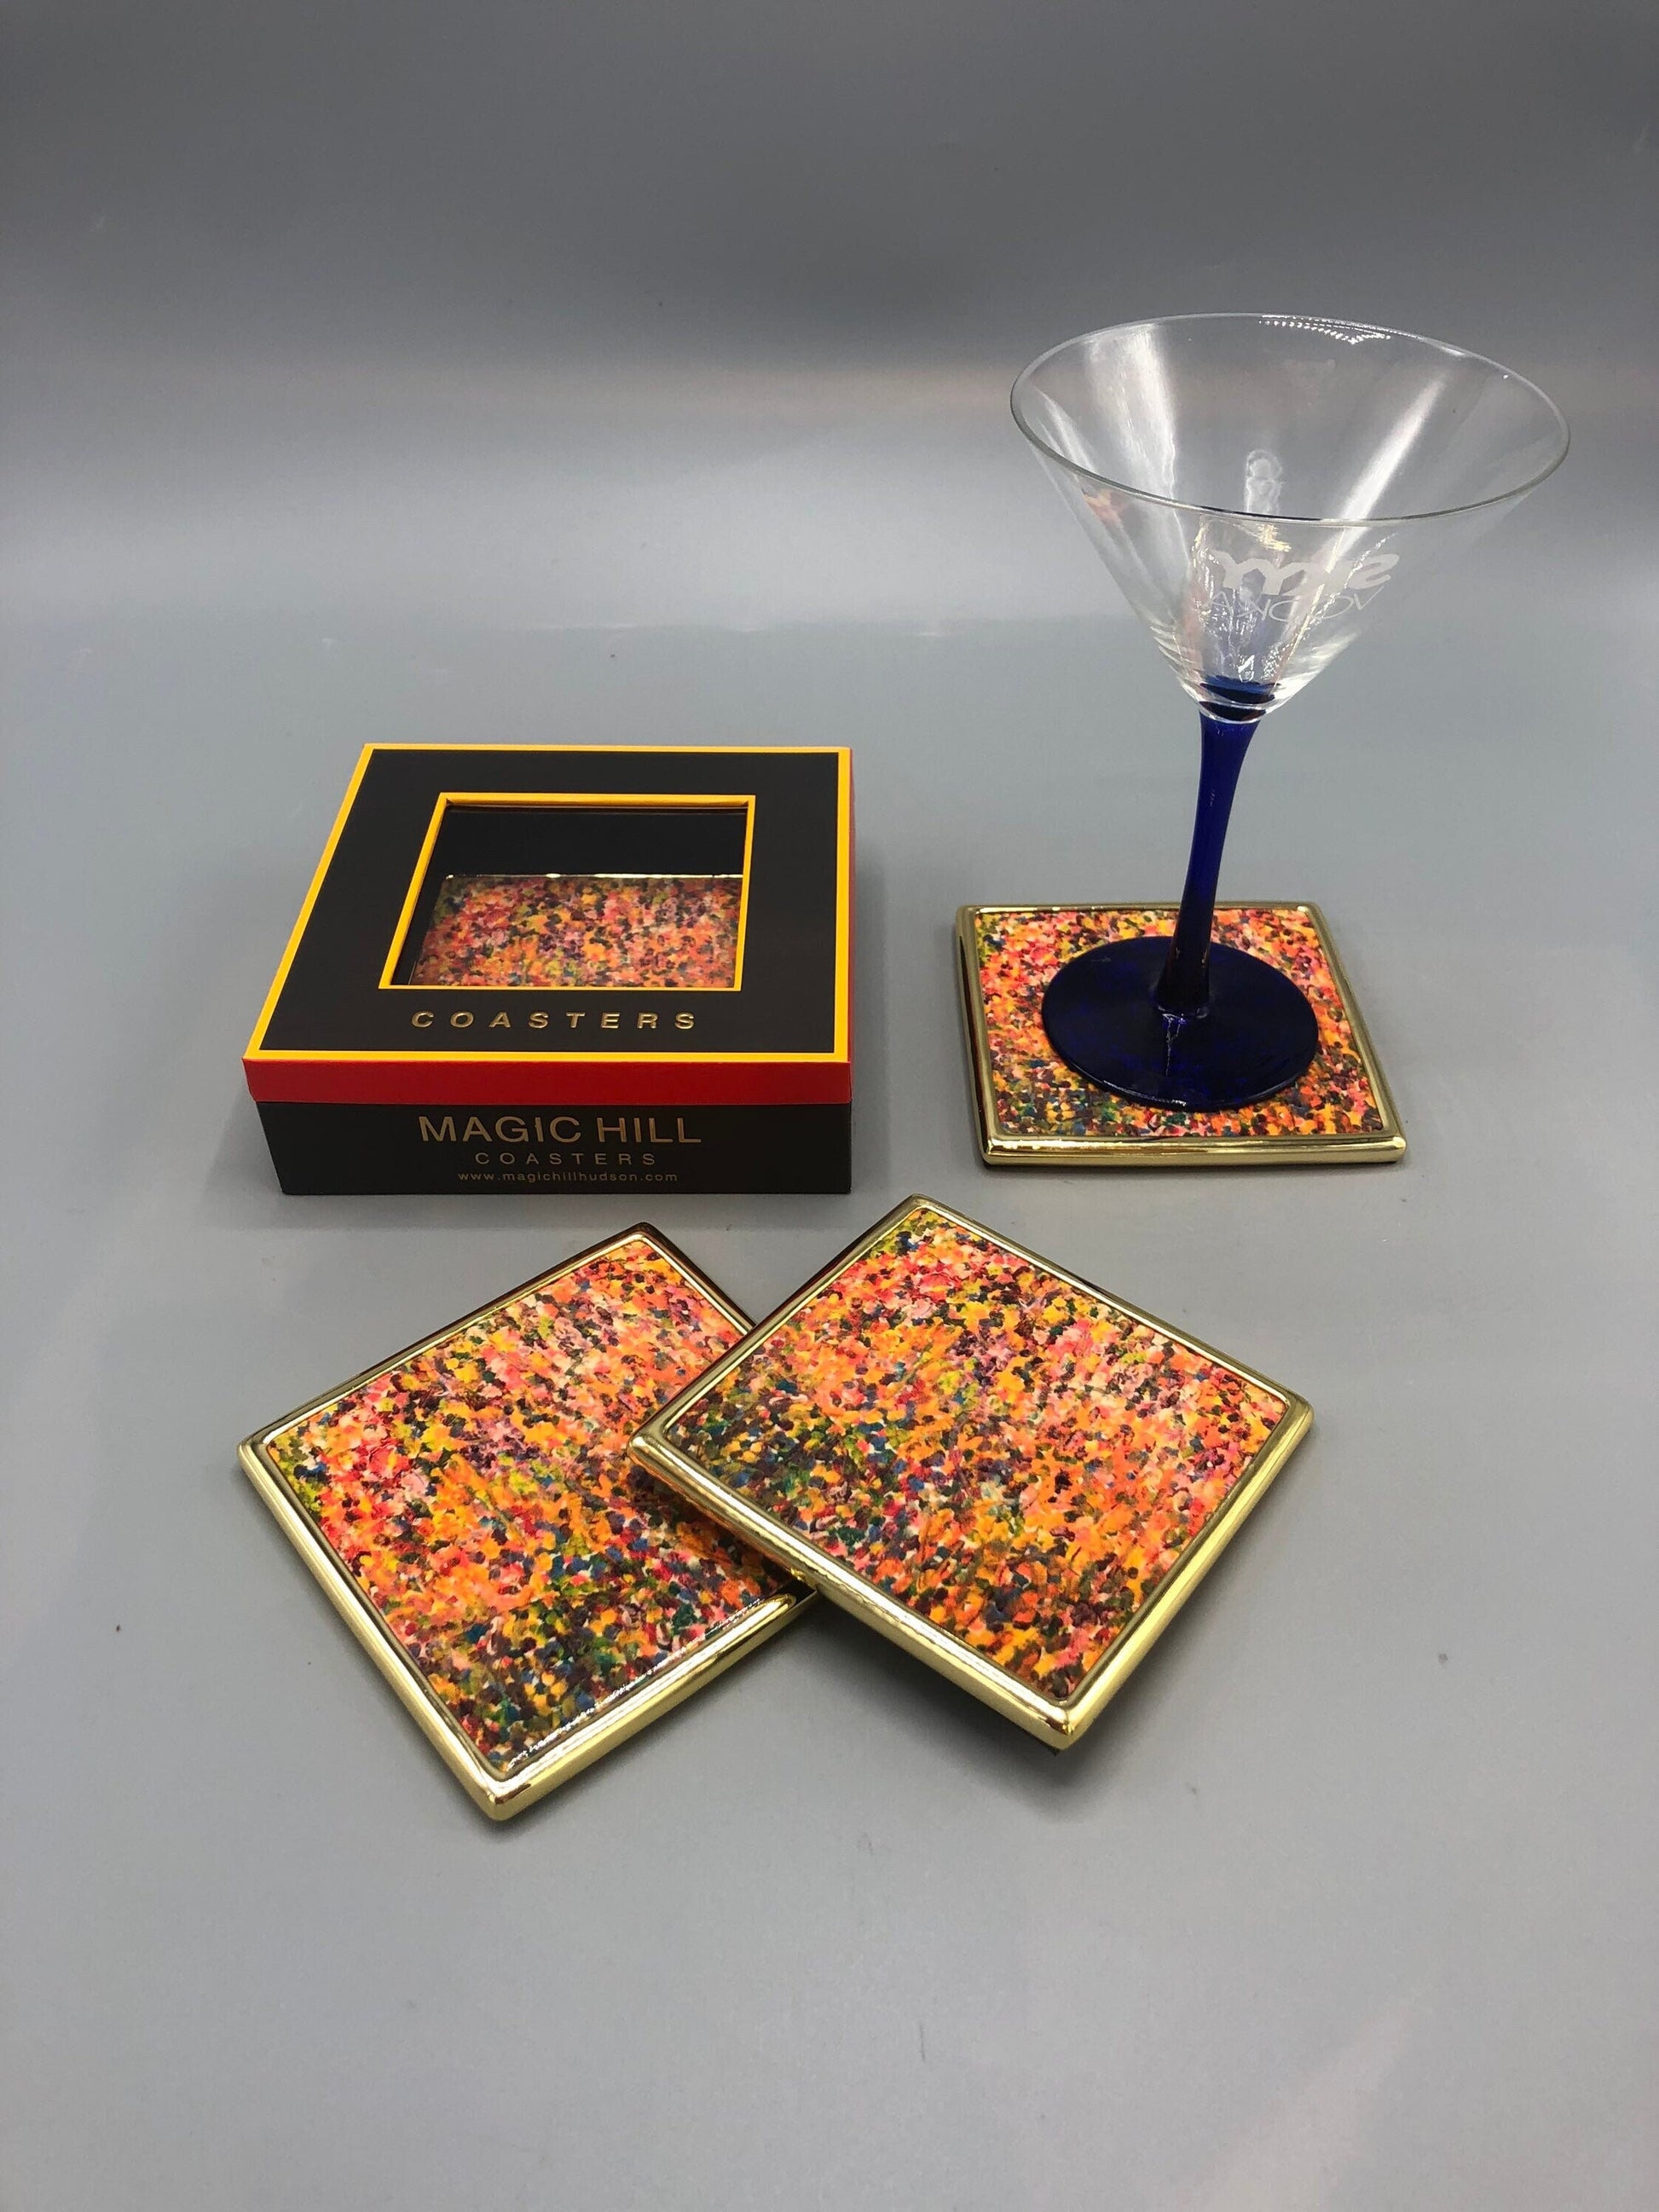 Handmade ceramic coasters with brass trim and velvet on the bottom. Art by Bruce Mishell